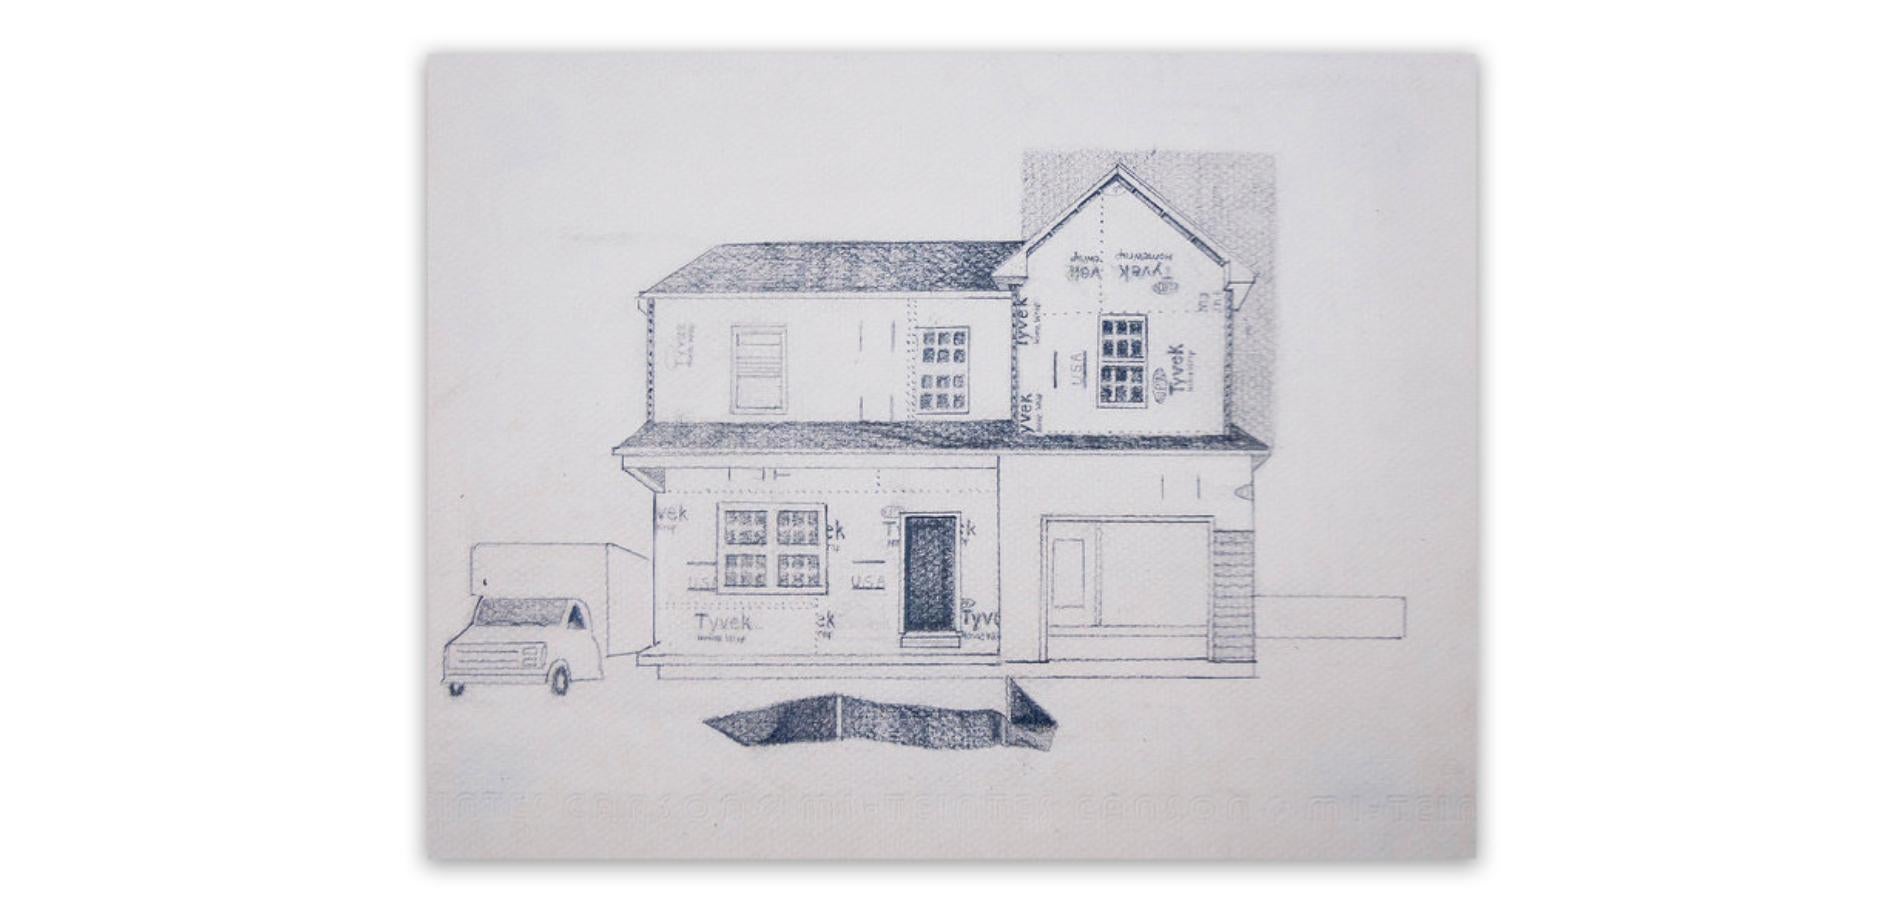 Study For Tyvek (2019) Graphite on paper drawing, architecture, truck, house - Art by Francesca Reyes